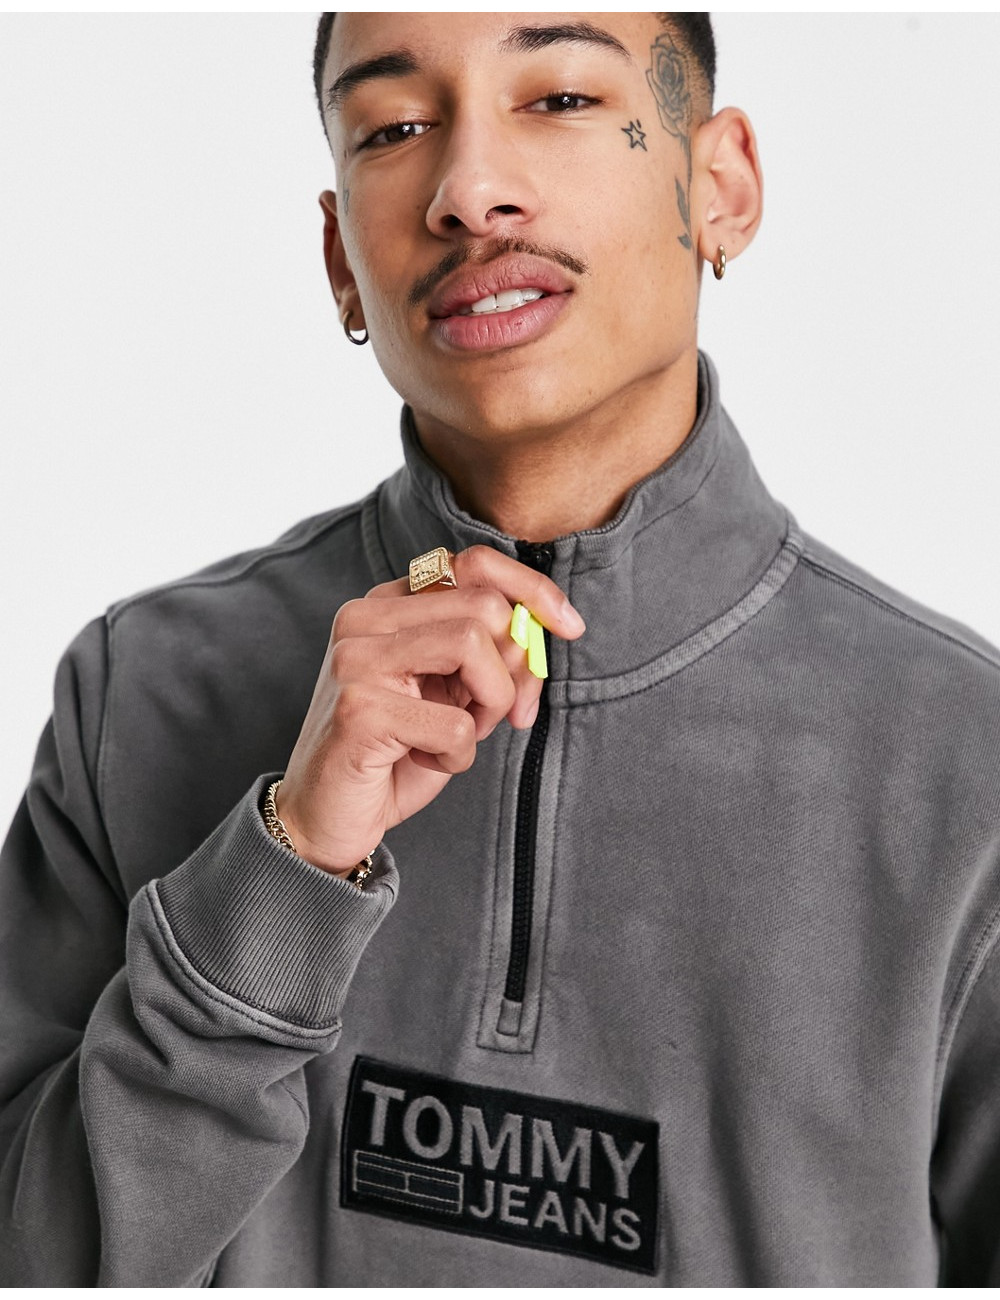 Tommy Jeans tonal corp logo...